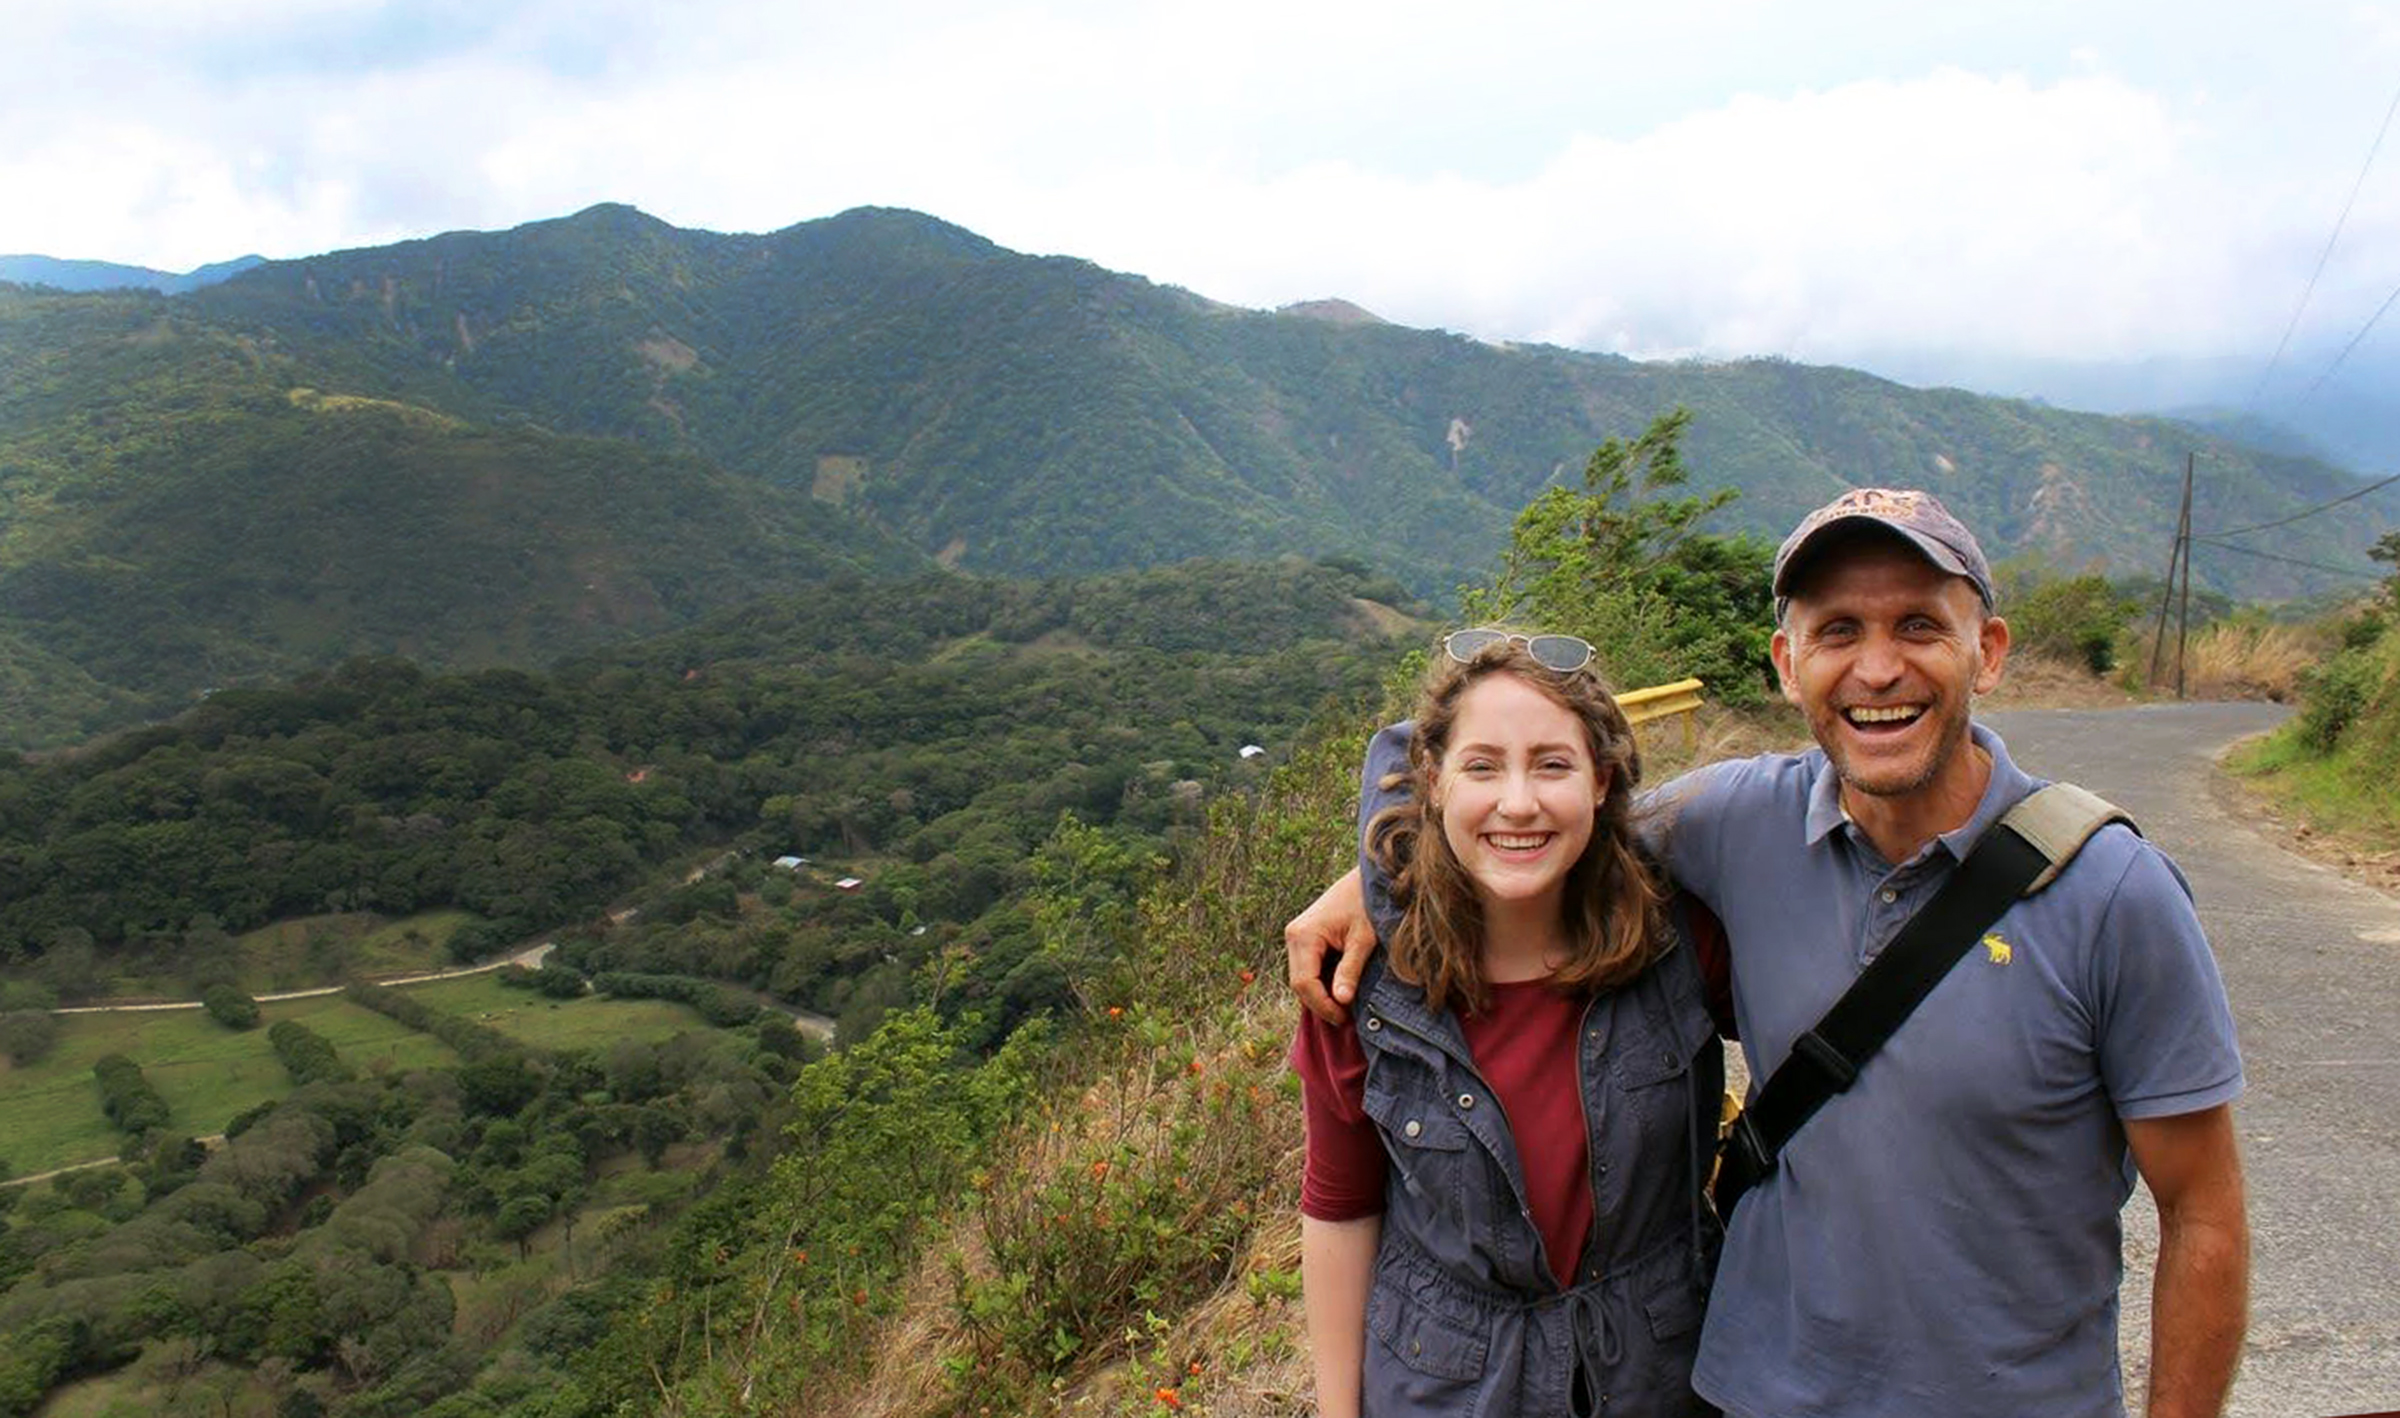 Image shows two people standing arm in arm smiling in front of a green mountain